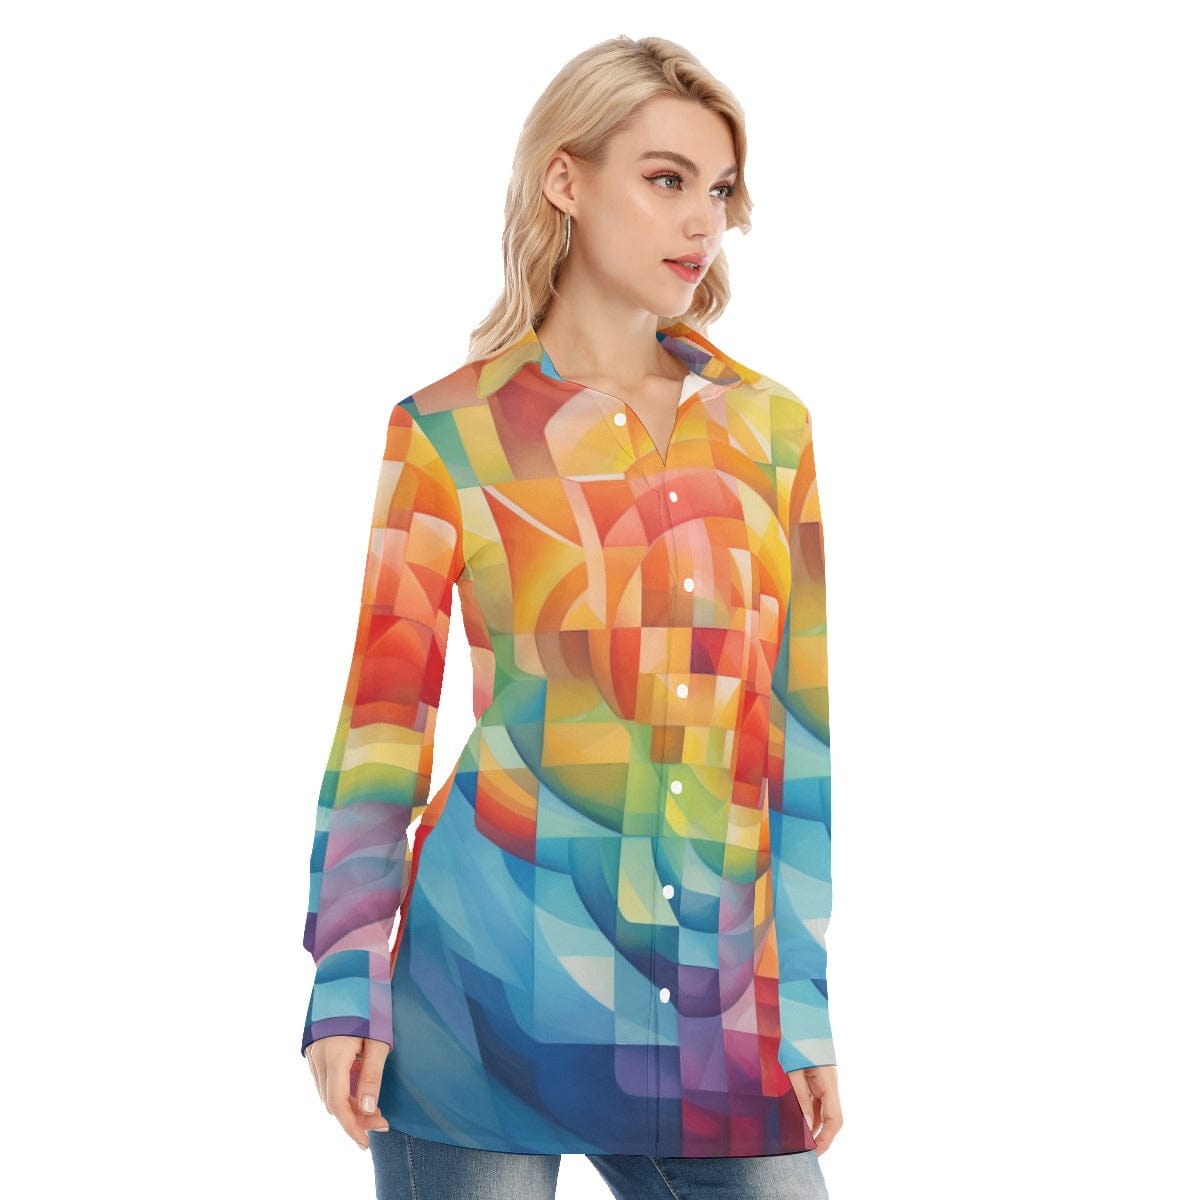 3R9EQ All-Over Print Women's Long Shirt |115GSM98% Cotton and 2% spandex